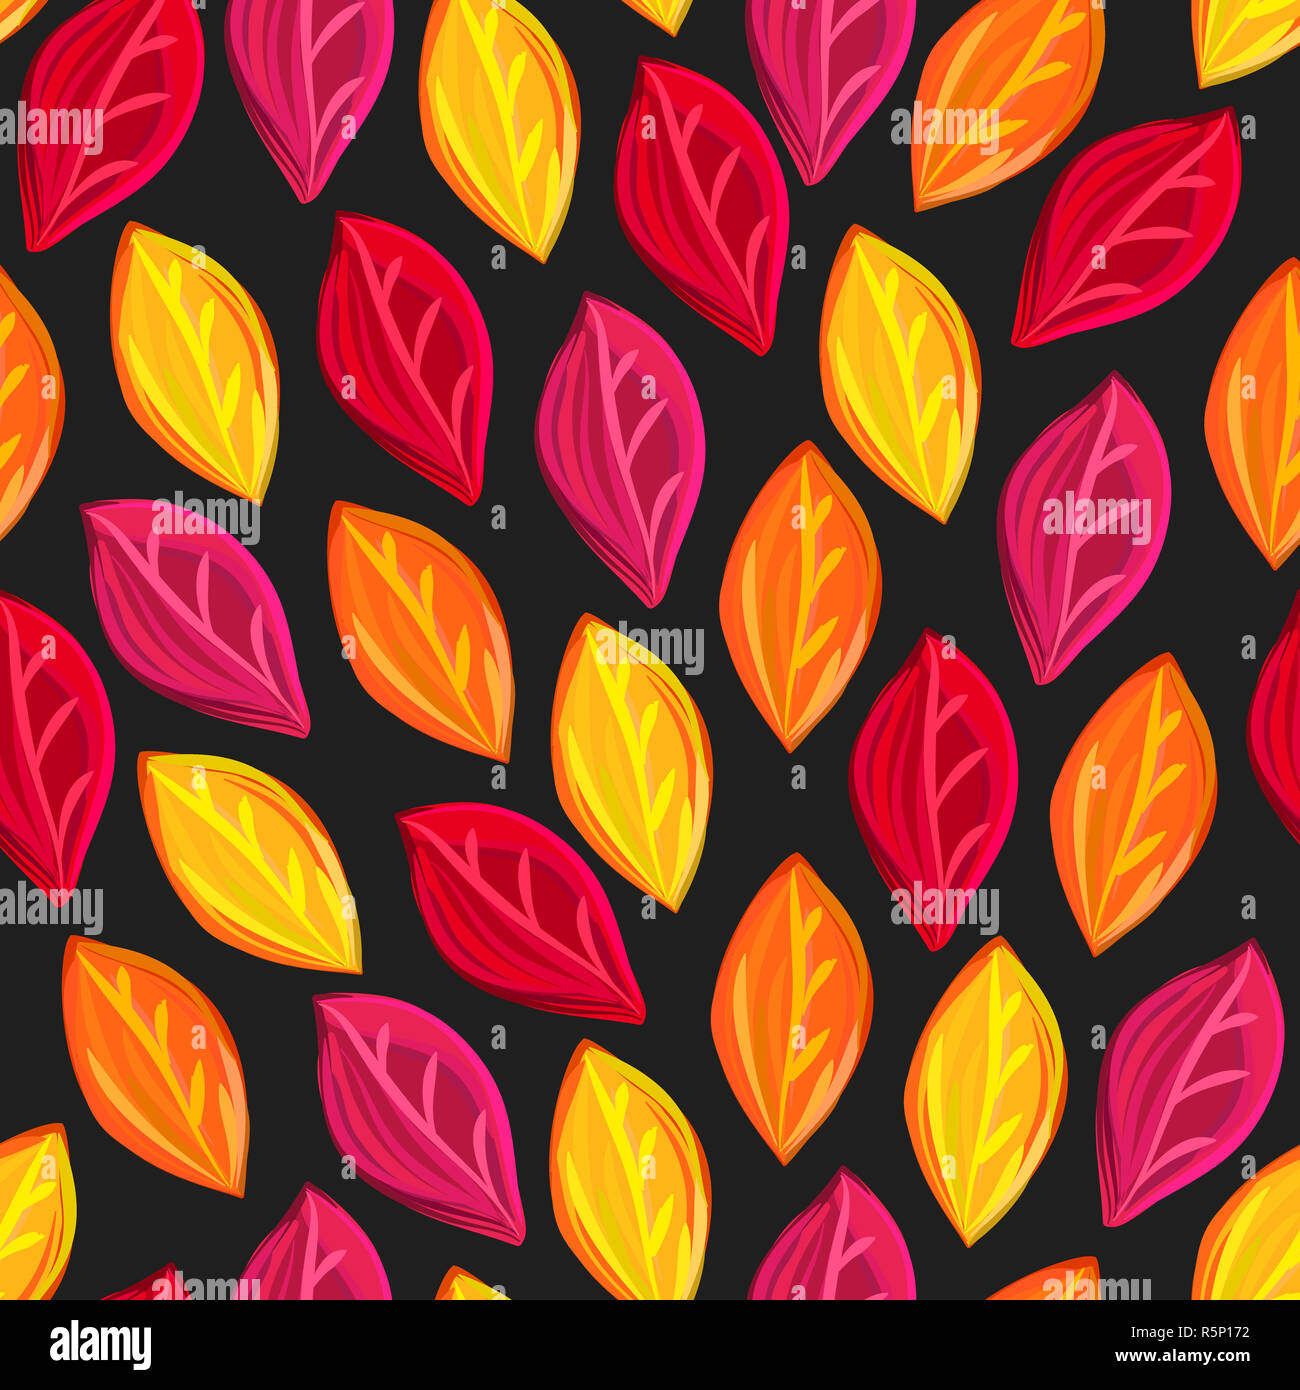 Floral seamless pattern with fallen leaves. Autumn. Leaf fall. Colorful artistic background Stock Photo